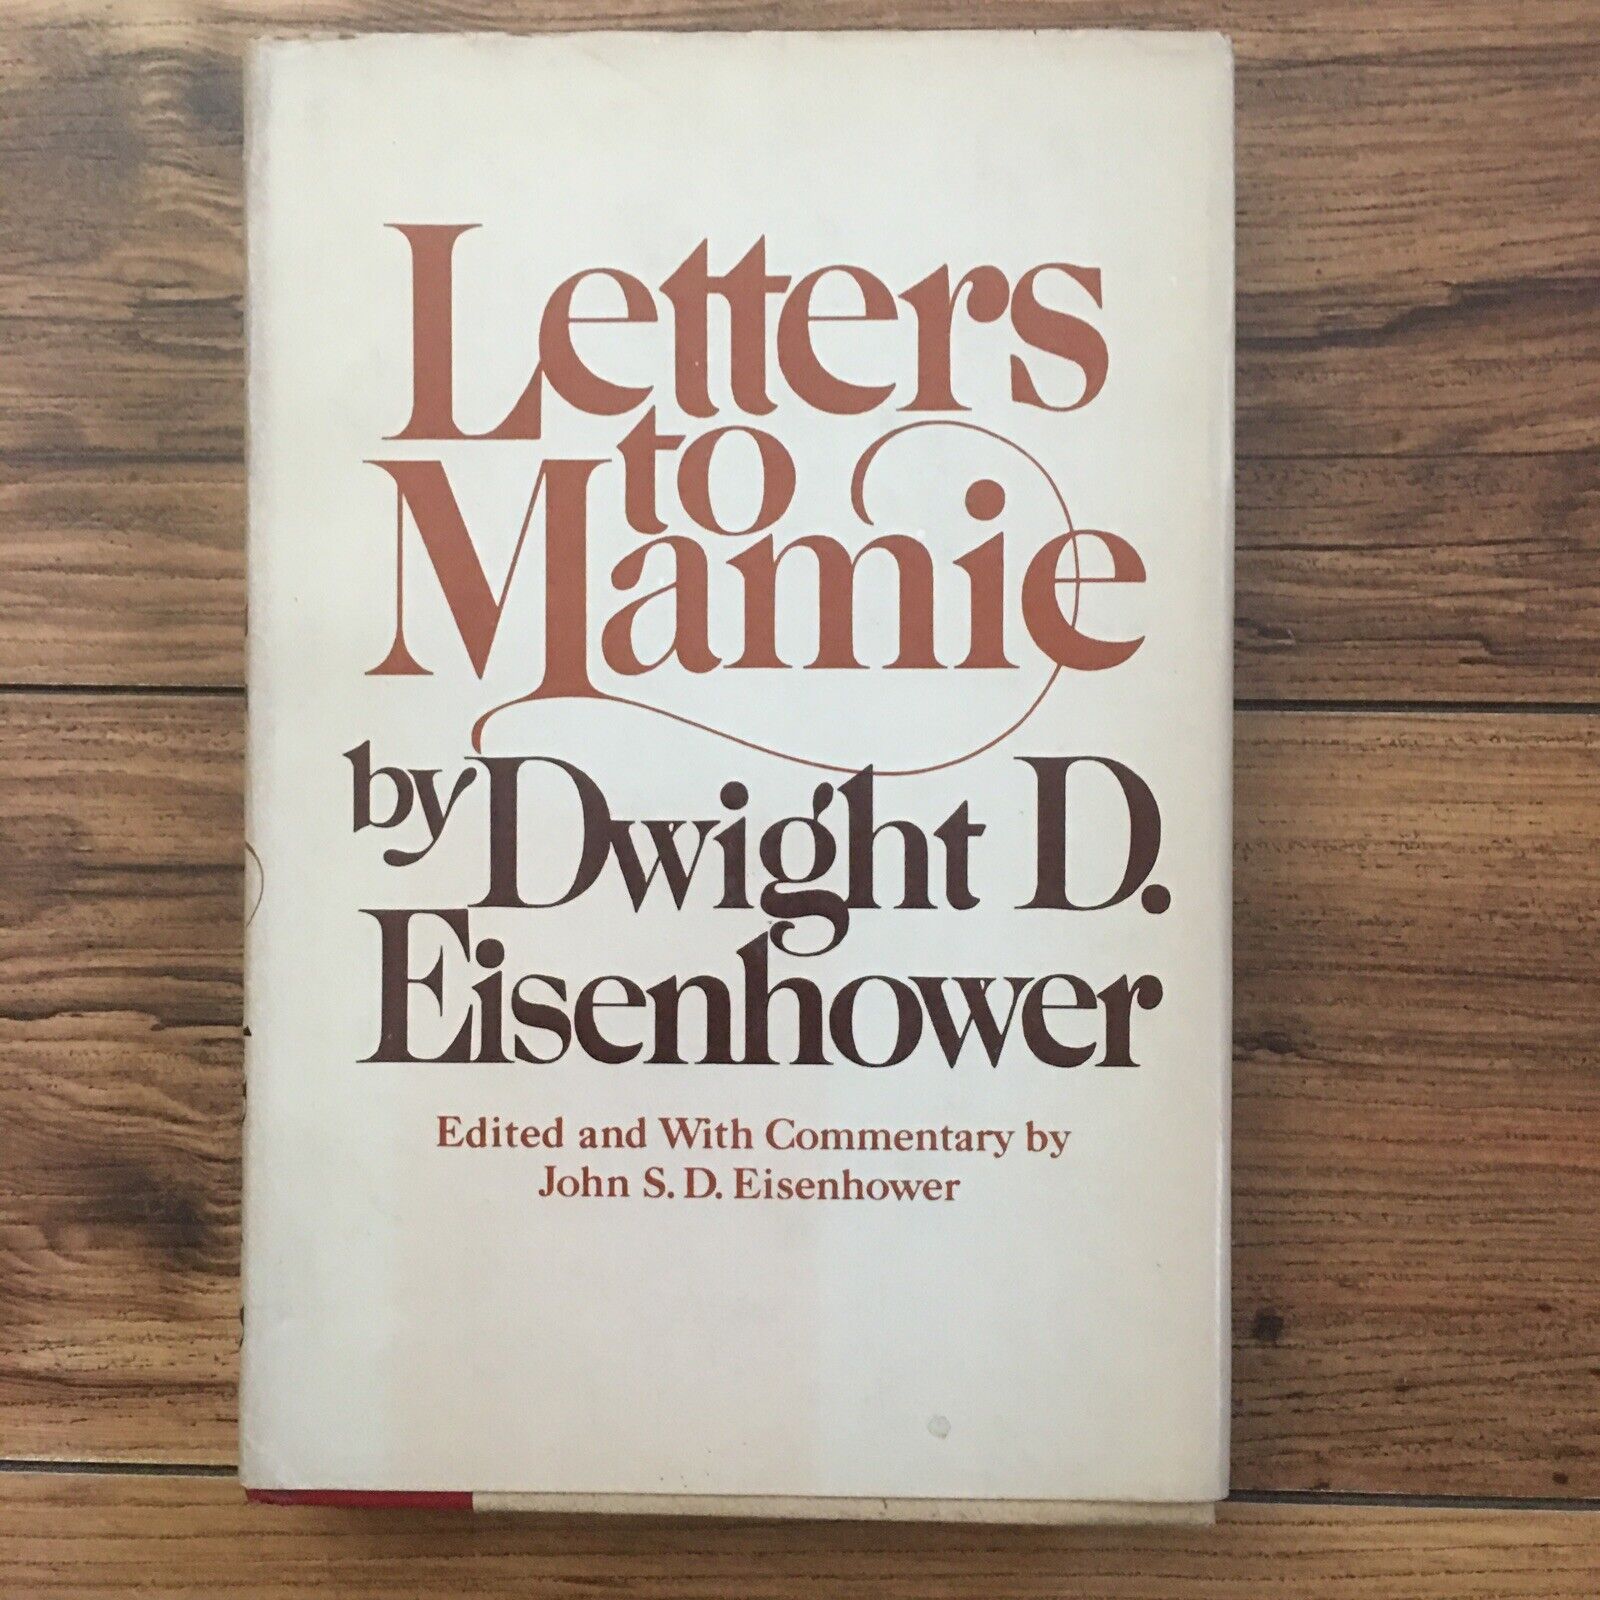 LETTERS TO MAMIE BY DWIGHT D. EISENHOWER  1977 Hardcover Book Club Edition